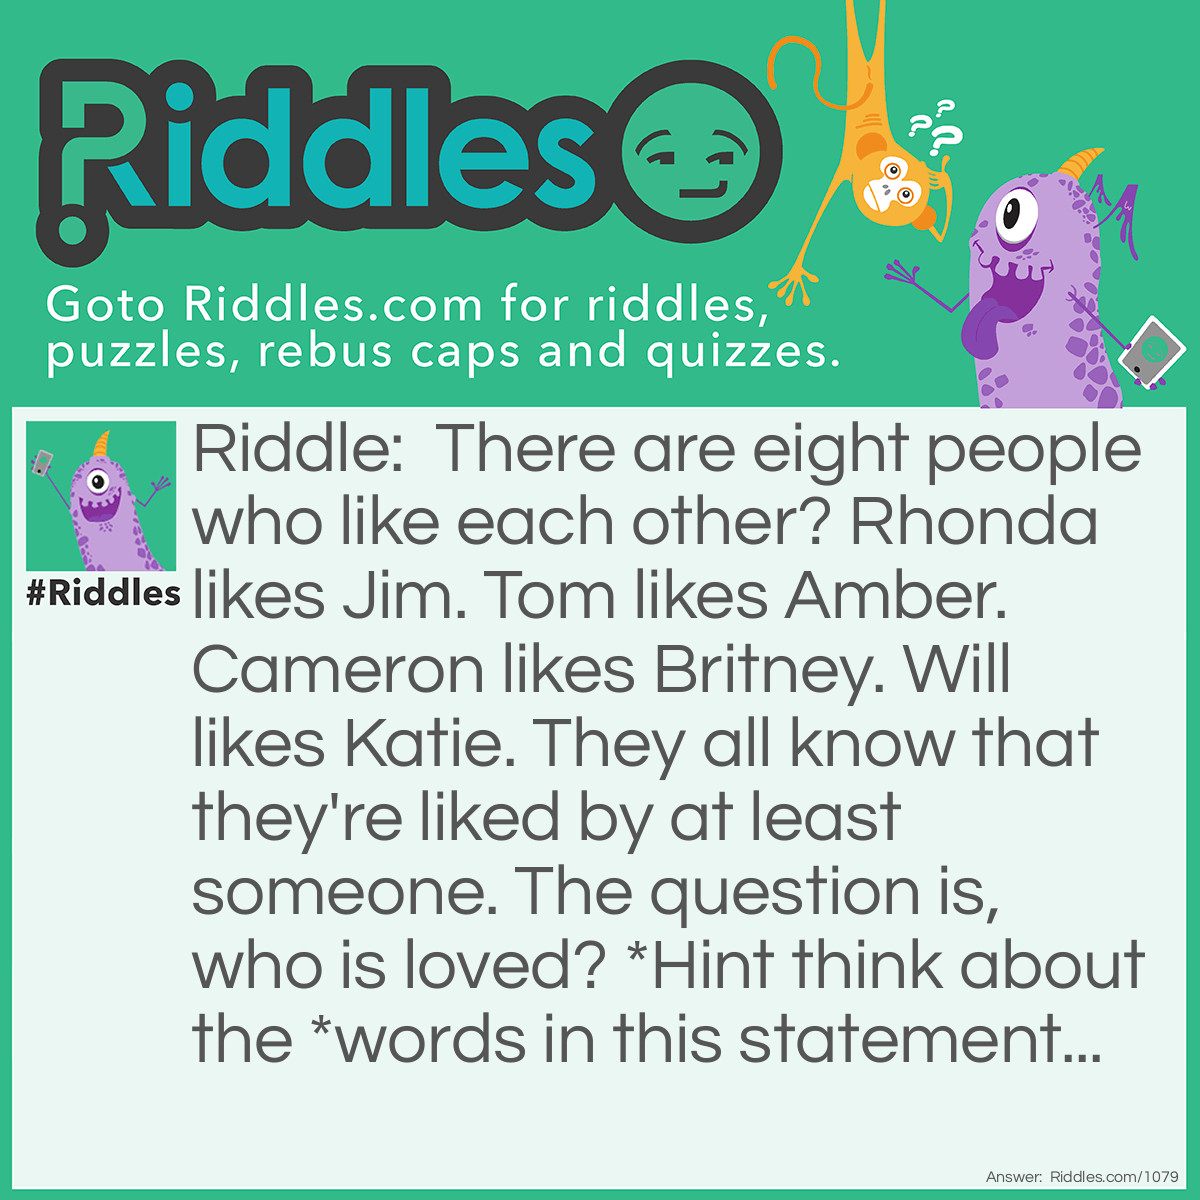 Riddle: There are eight people who like each other? Rhonda likes Jim. Tom likes Amber. Cameron likes Britney. Will likes Katie. They all know that they're liked by at least someone. The question is, who is loved? *Hint think about the *words in this statement... Answer: No one is loved, they're just liked.